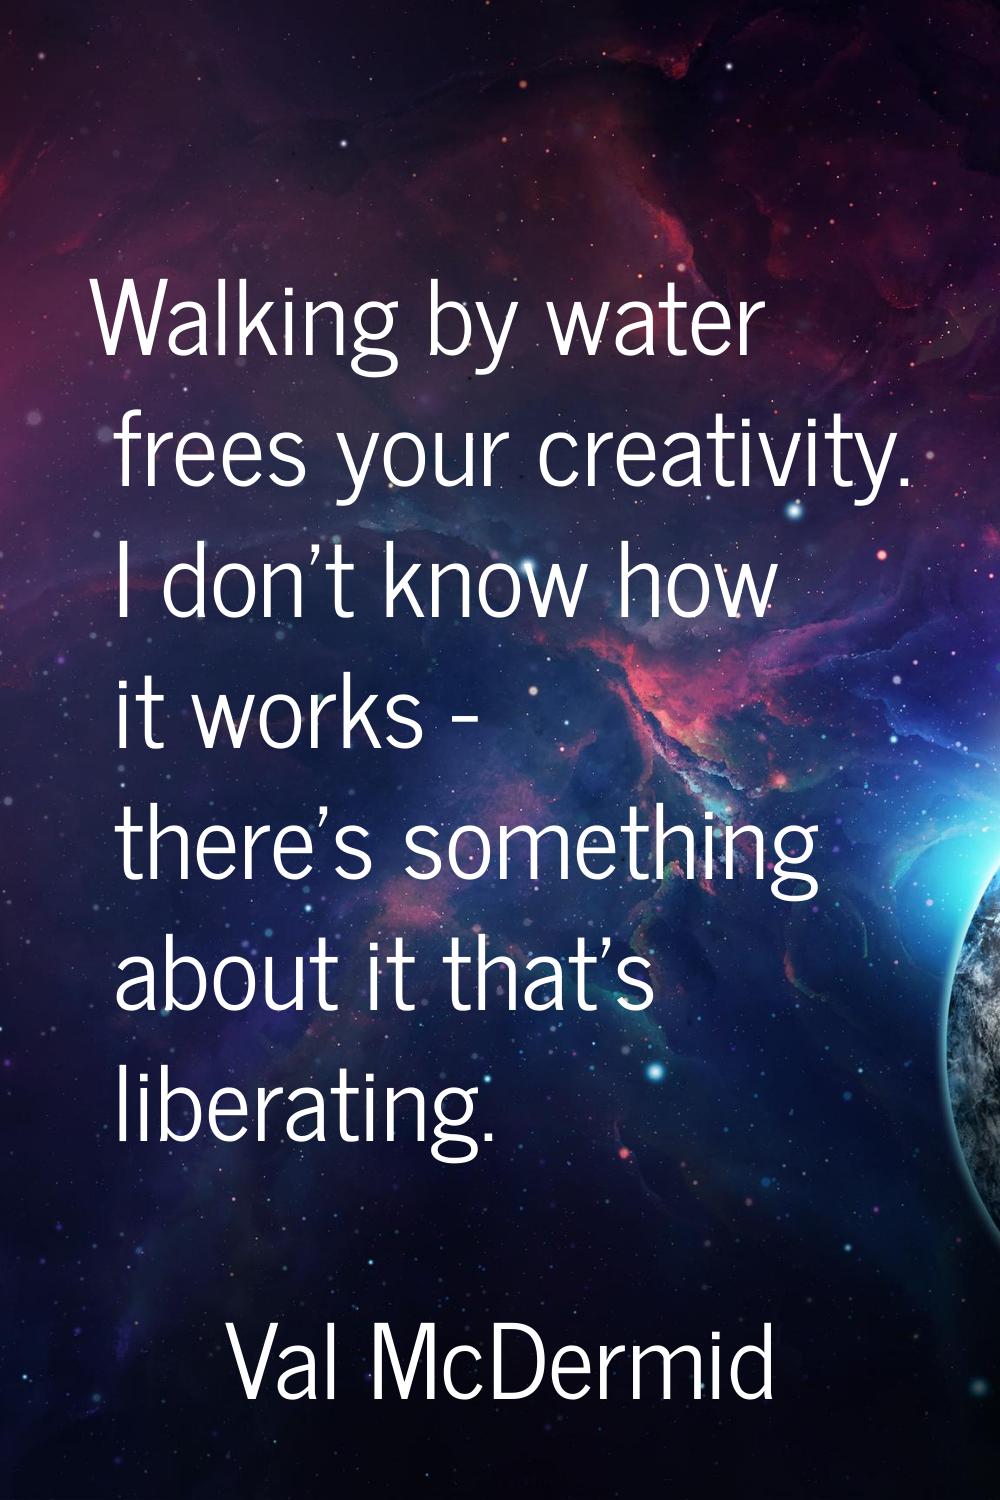 Walking by water frees your creativity. I don't know how it works - there's something about it that